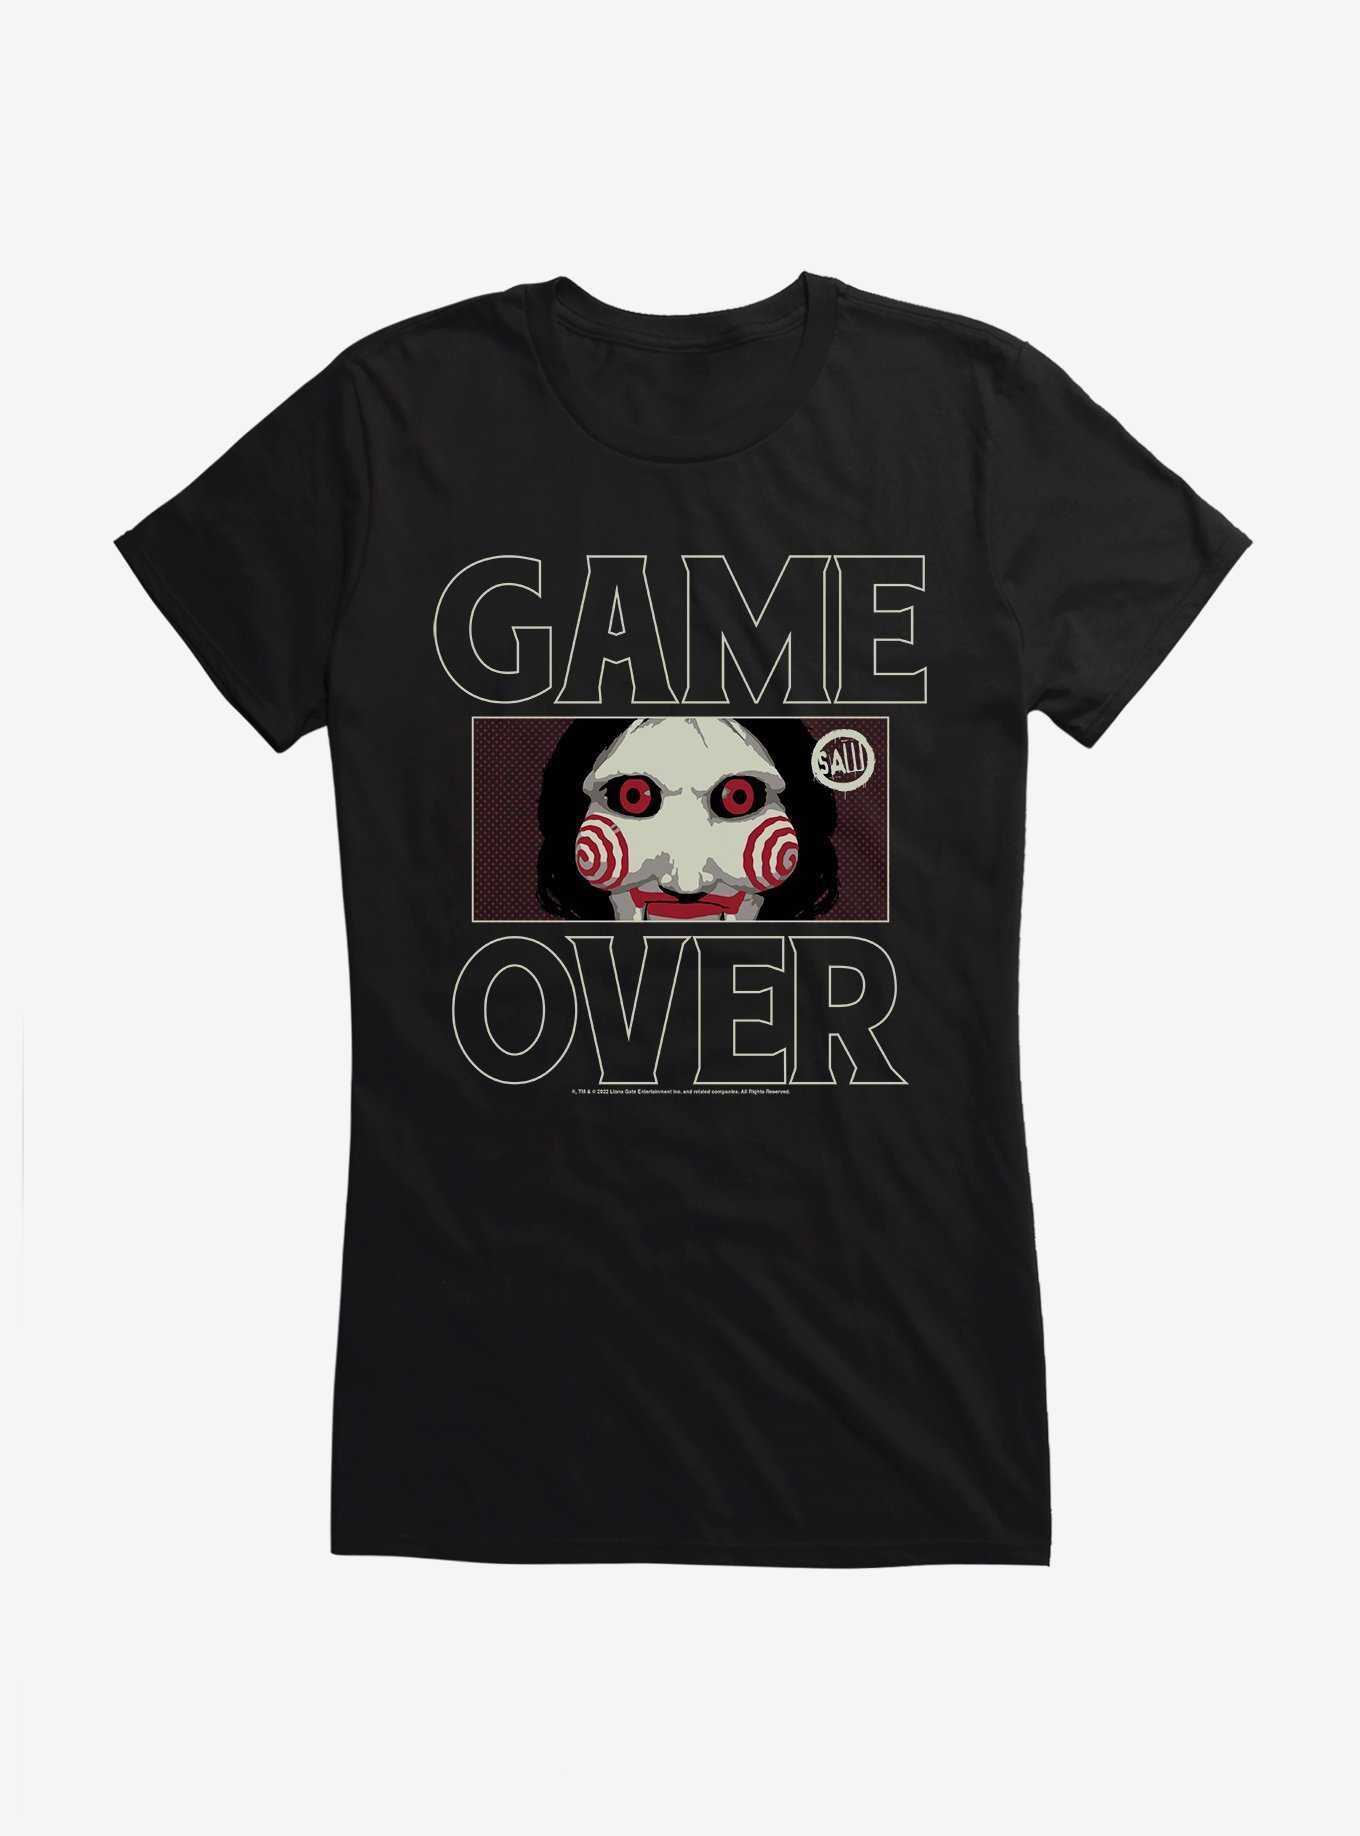 Saw Game Over Girls T-Shirt, , hi-res